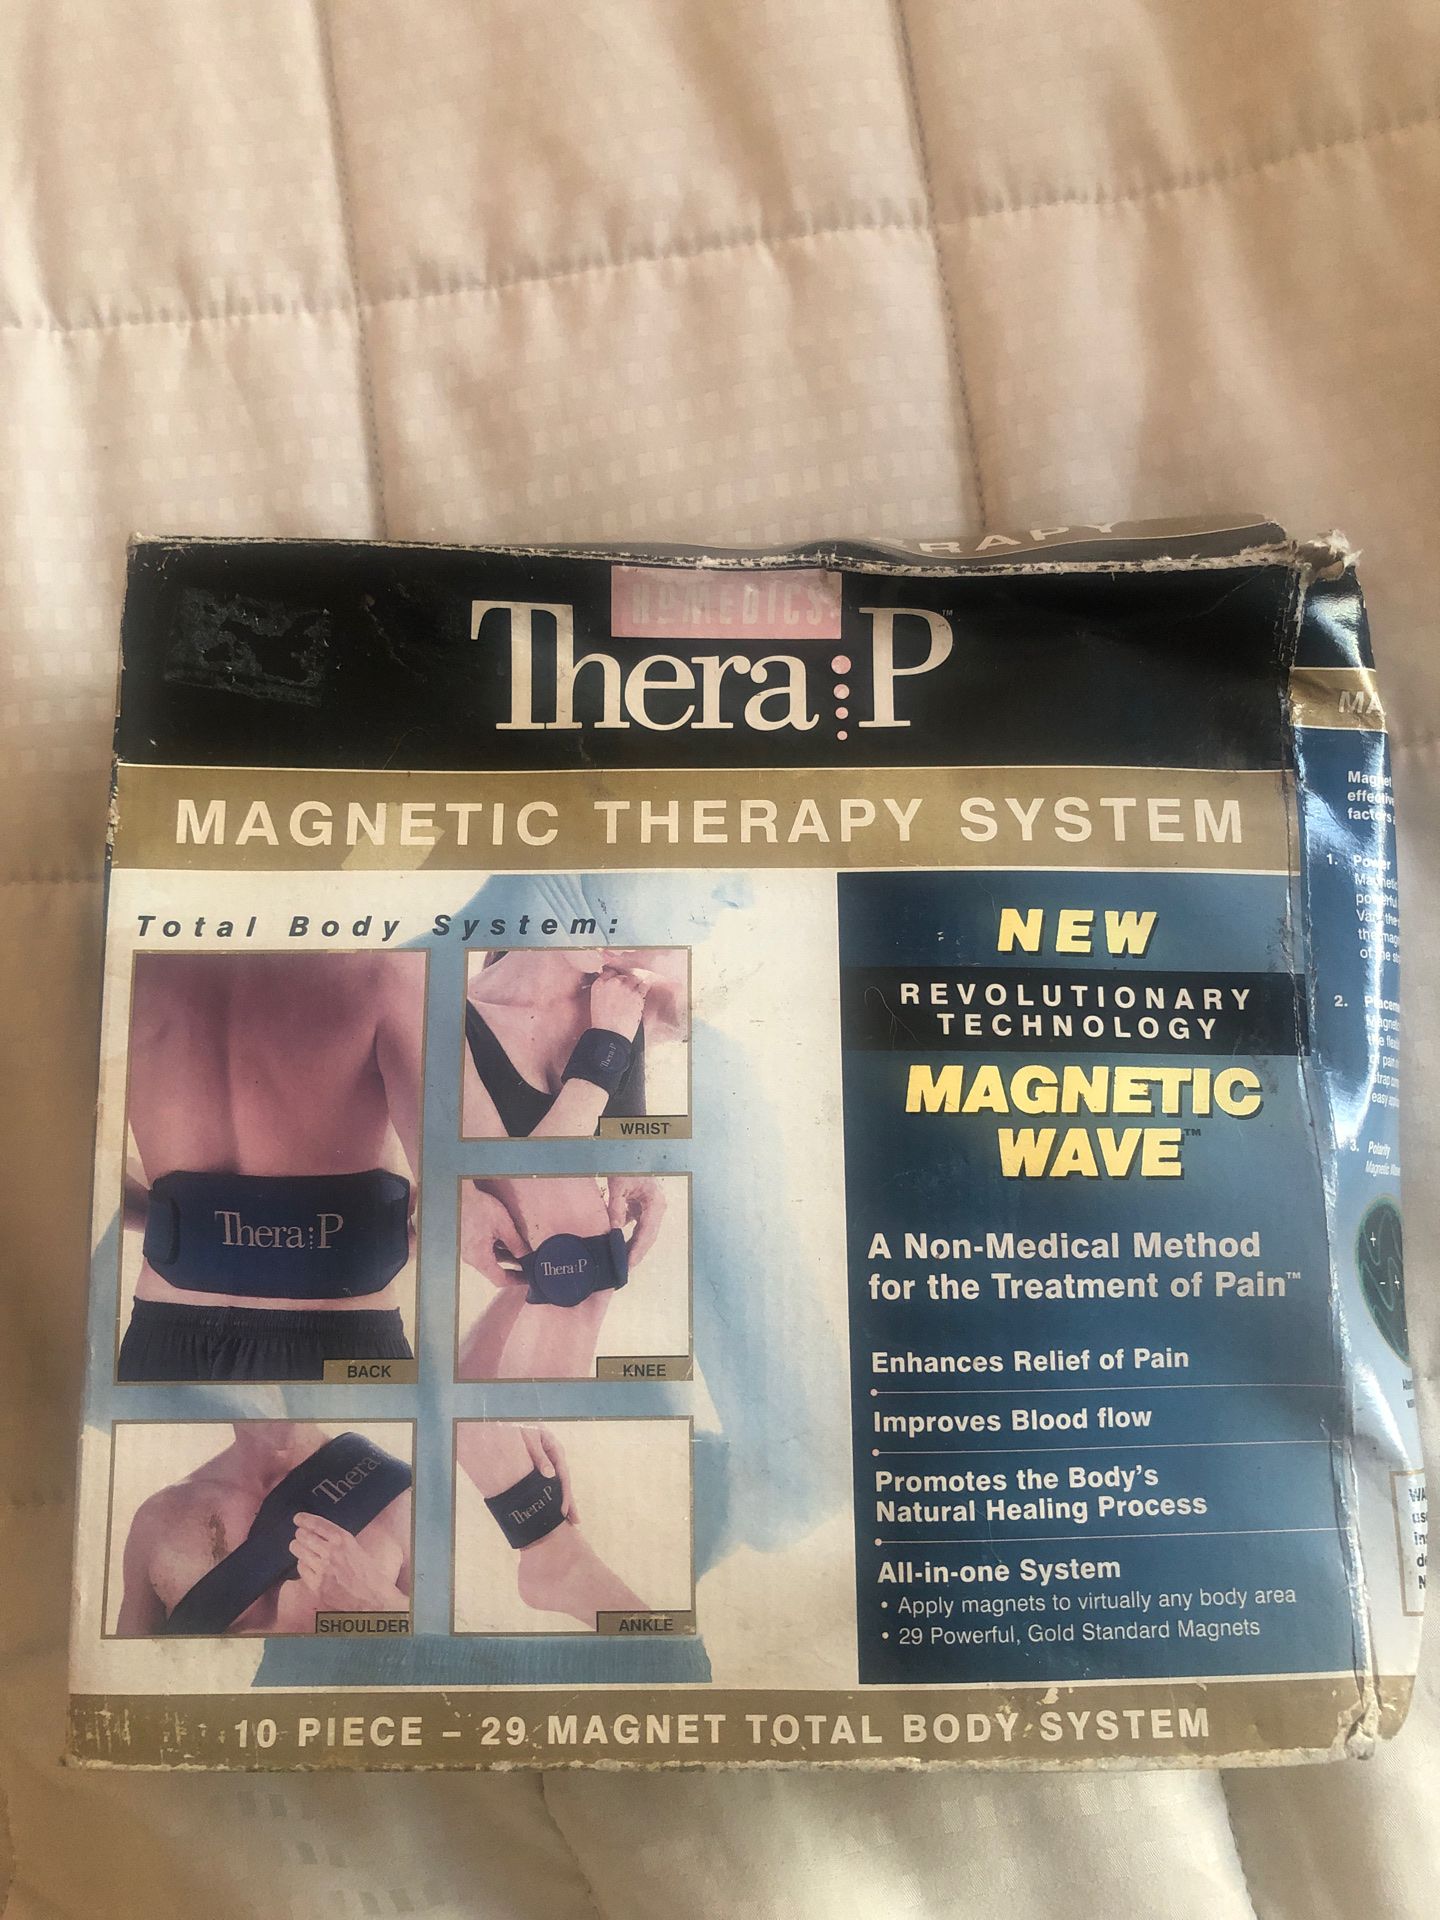 Magnetic therapy system